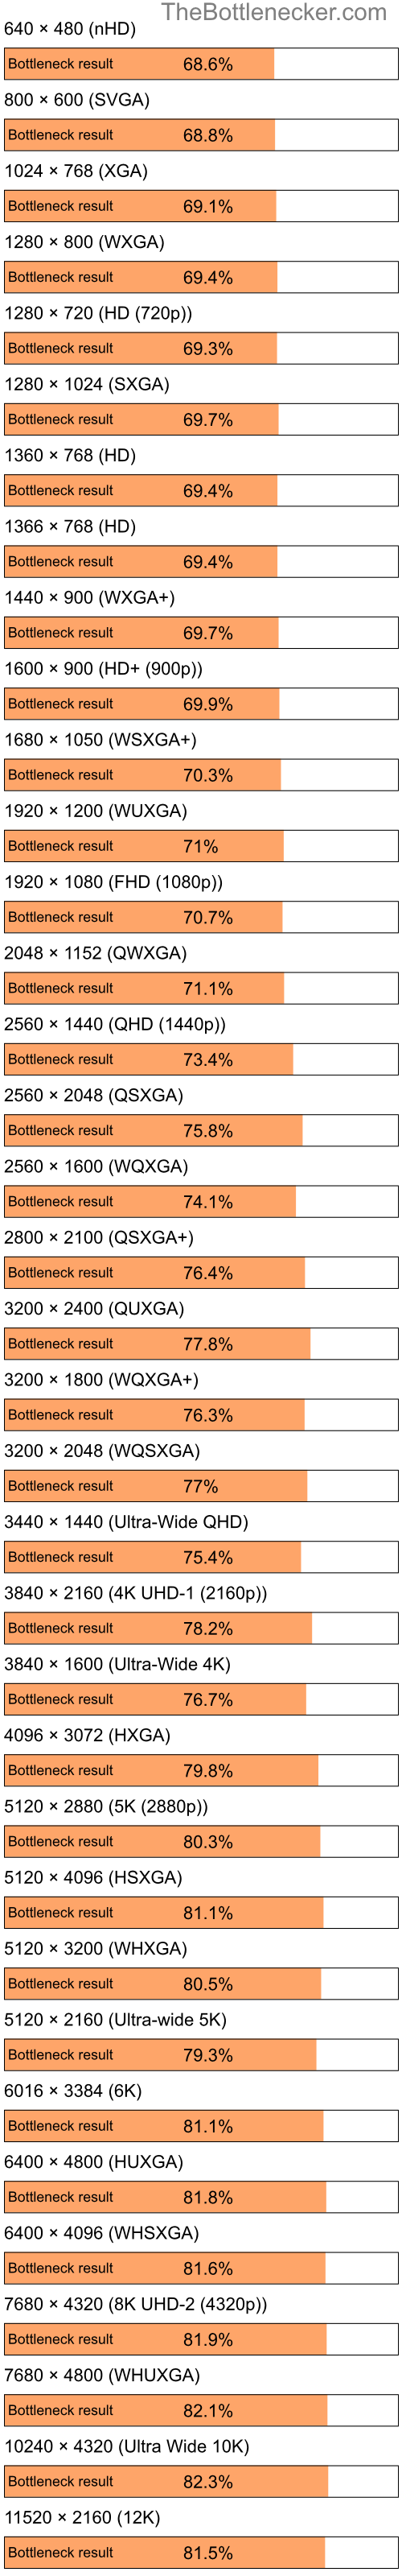 Bottleneck results by resolution for Intel Pentium 4 and AMD Radeon X1200 in Processor Intense Tasks